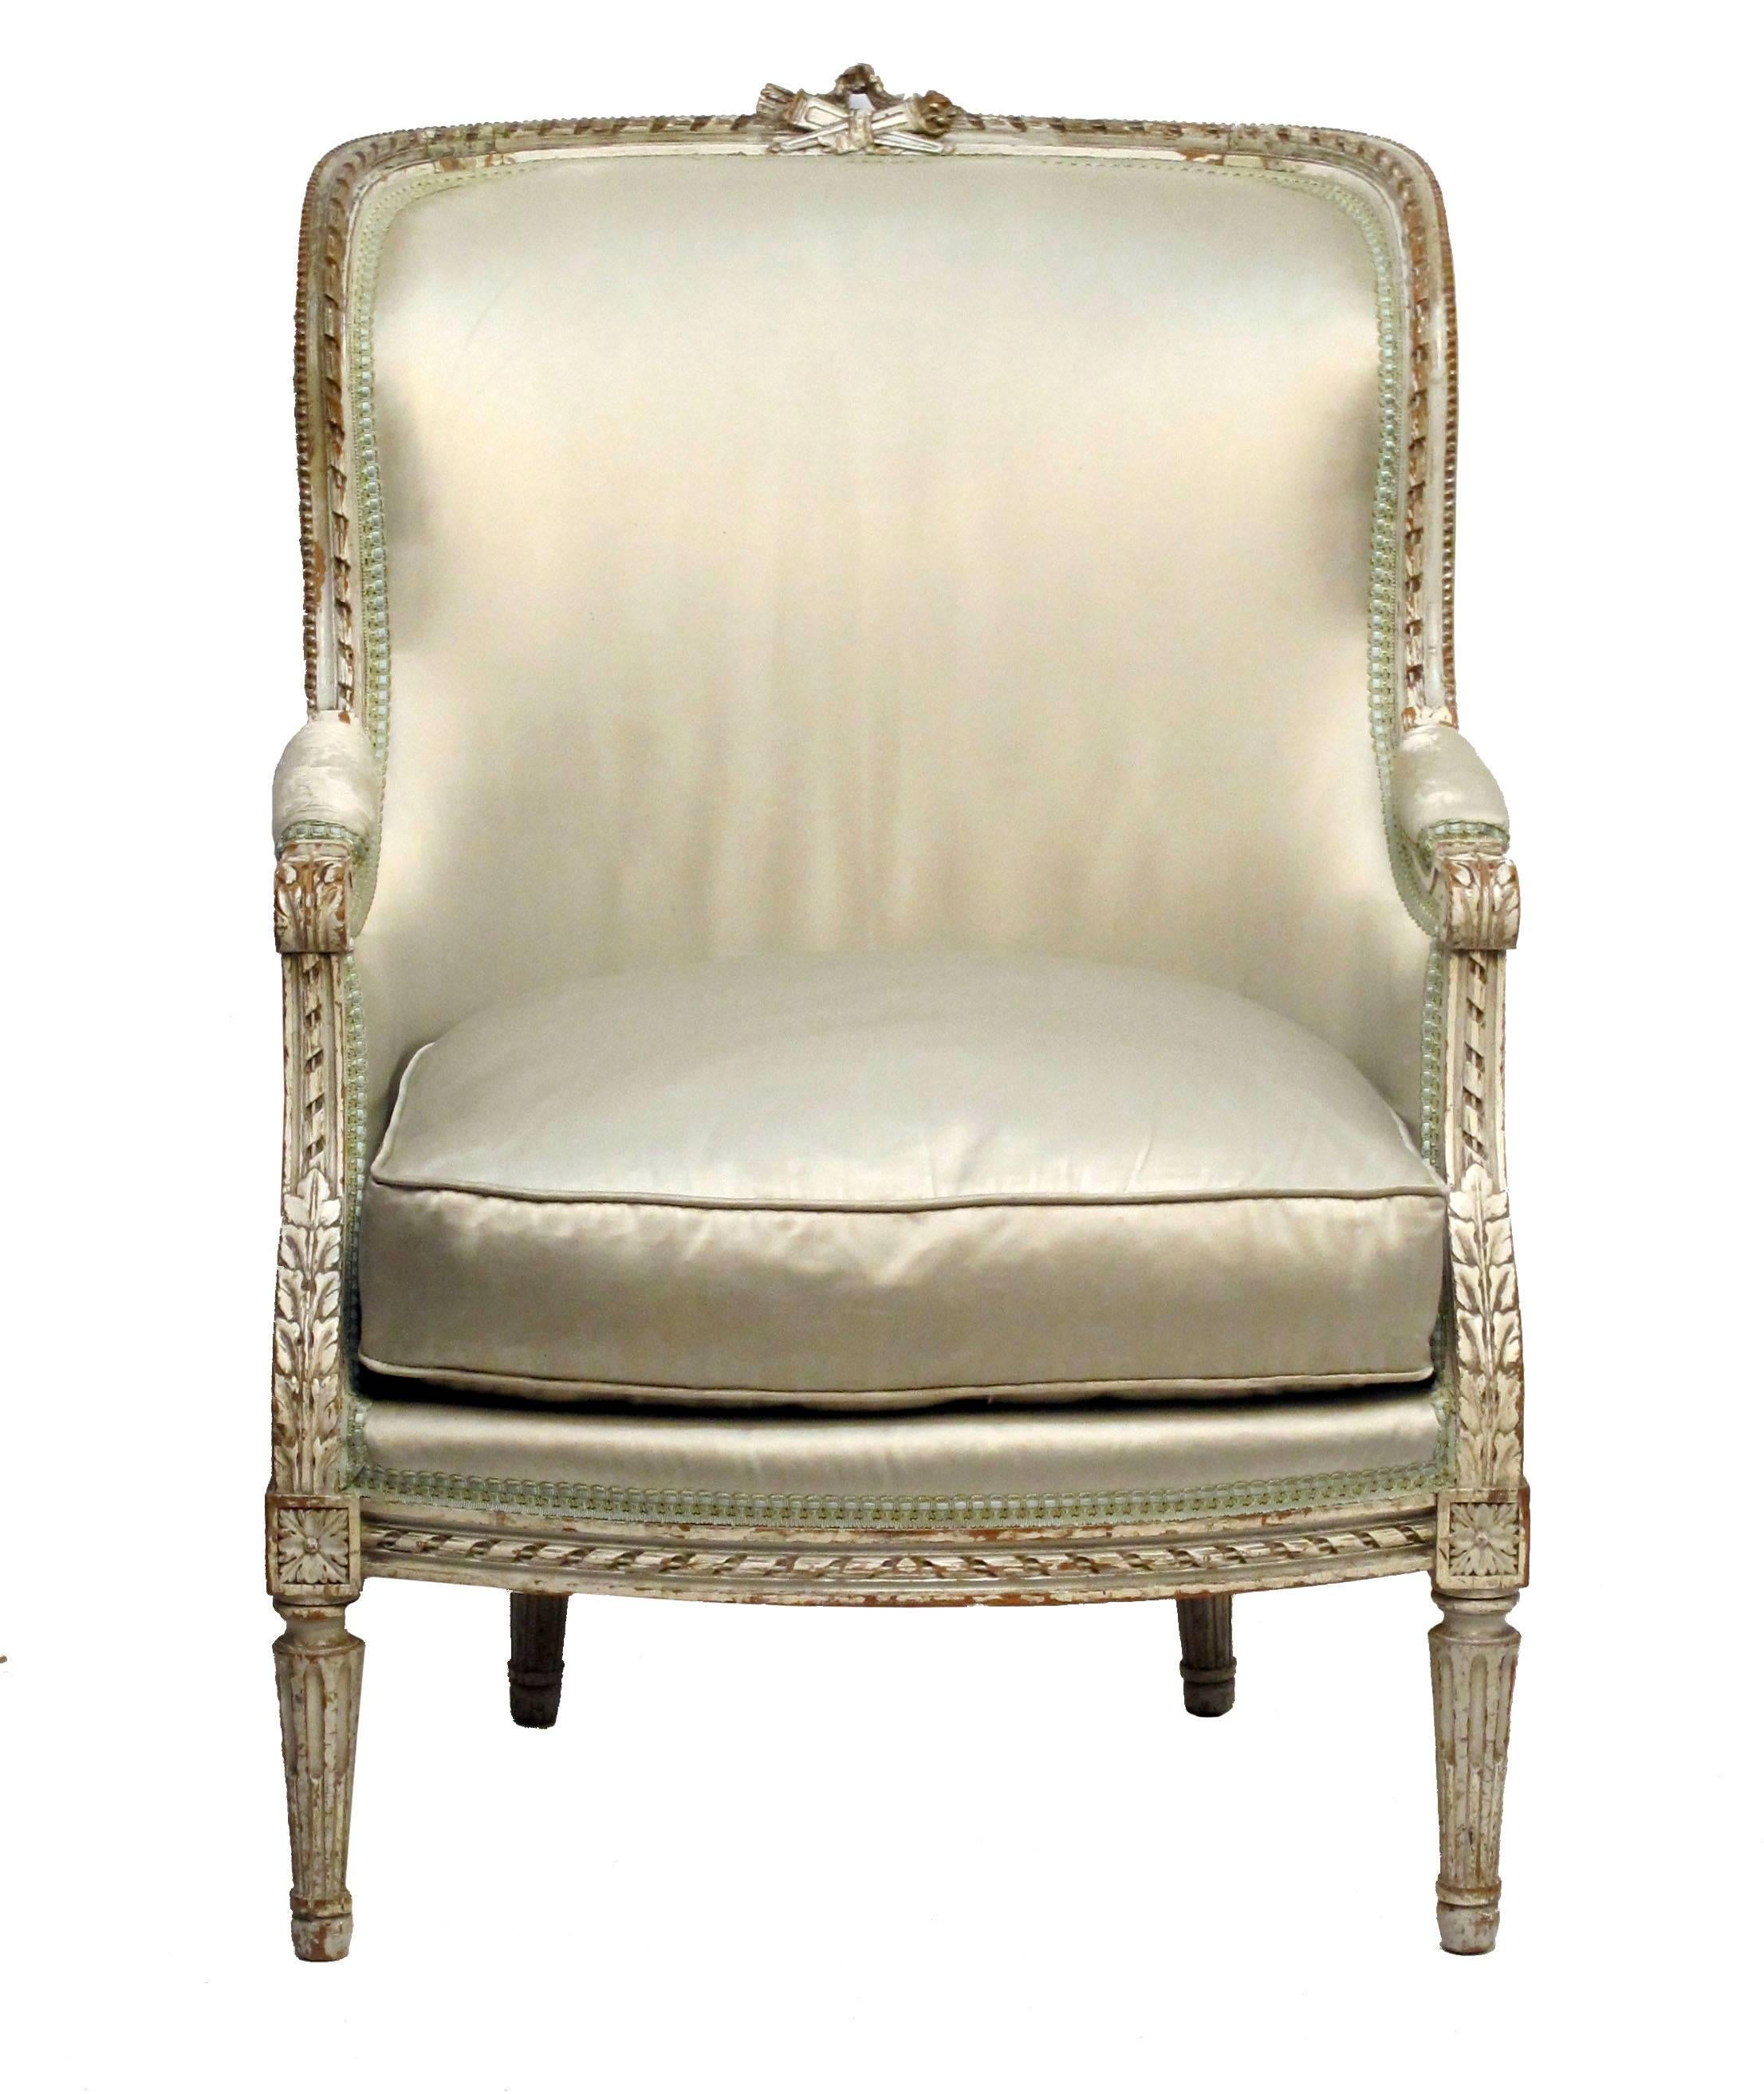 Elaborately carved and painted Louis XVI style bergere chair. The light green painted frame carved with twisted rope and curved back surmounted with crossed wheat and quiver design, standing on tapering fluted legs. Older satin upholstery in good